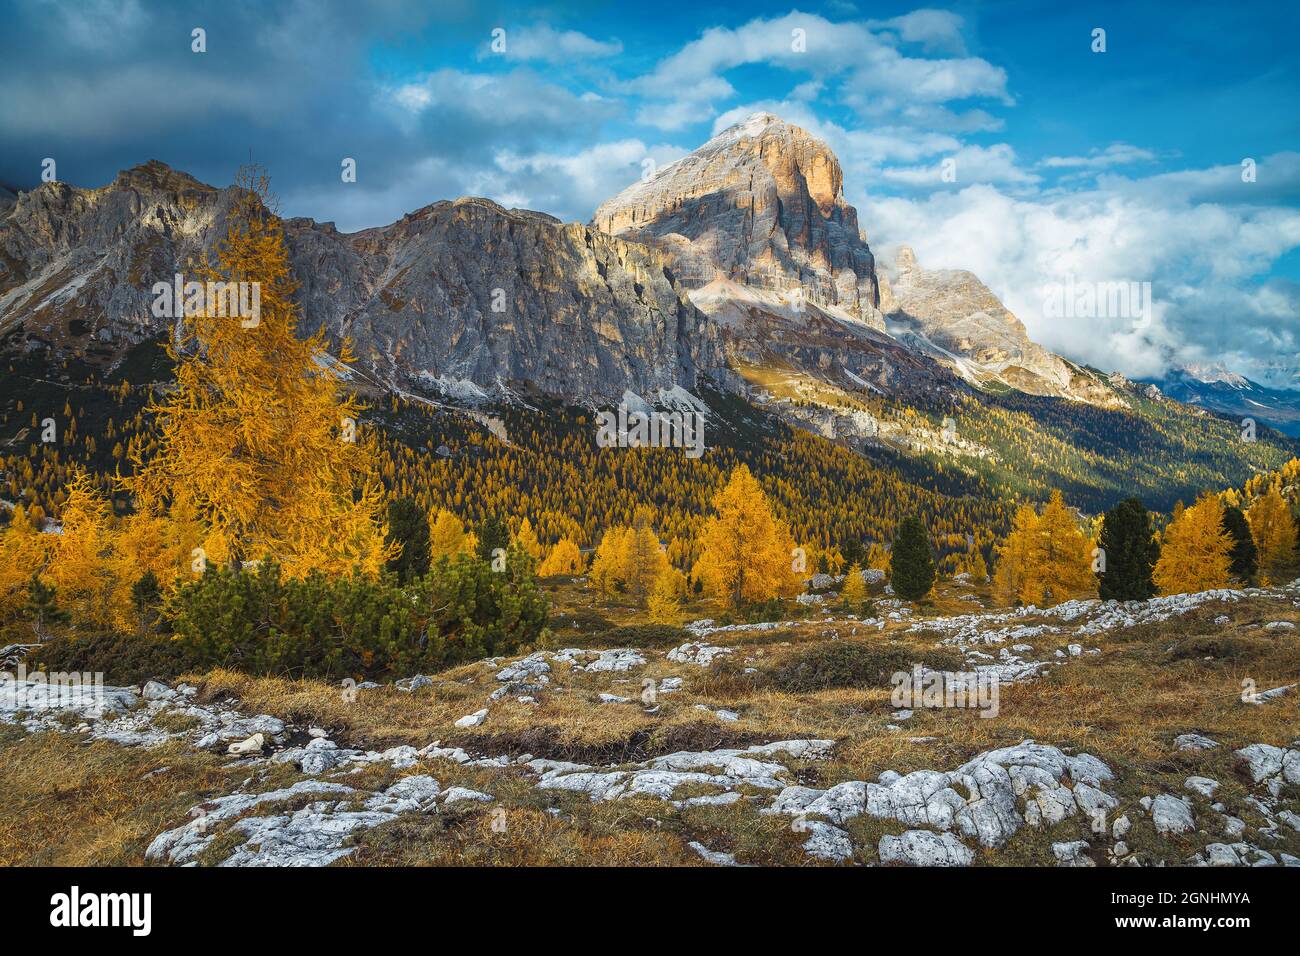 Wonderful autumn alpine scenery with colorful redwood forest and spectacular yellow larch trees. Clouds over the stunning high mountains, Passo Falzar Stock Photo